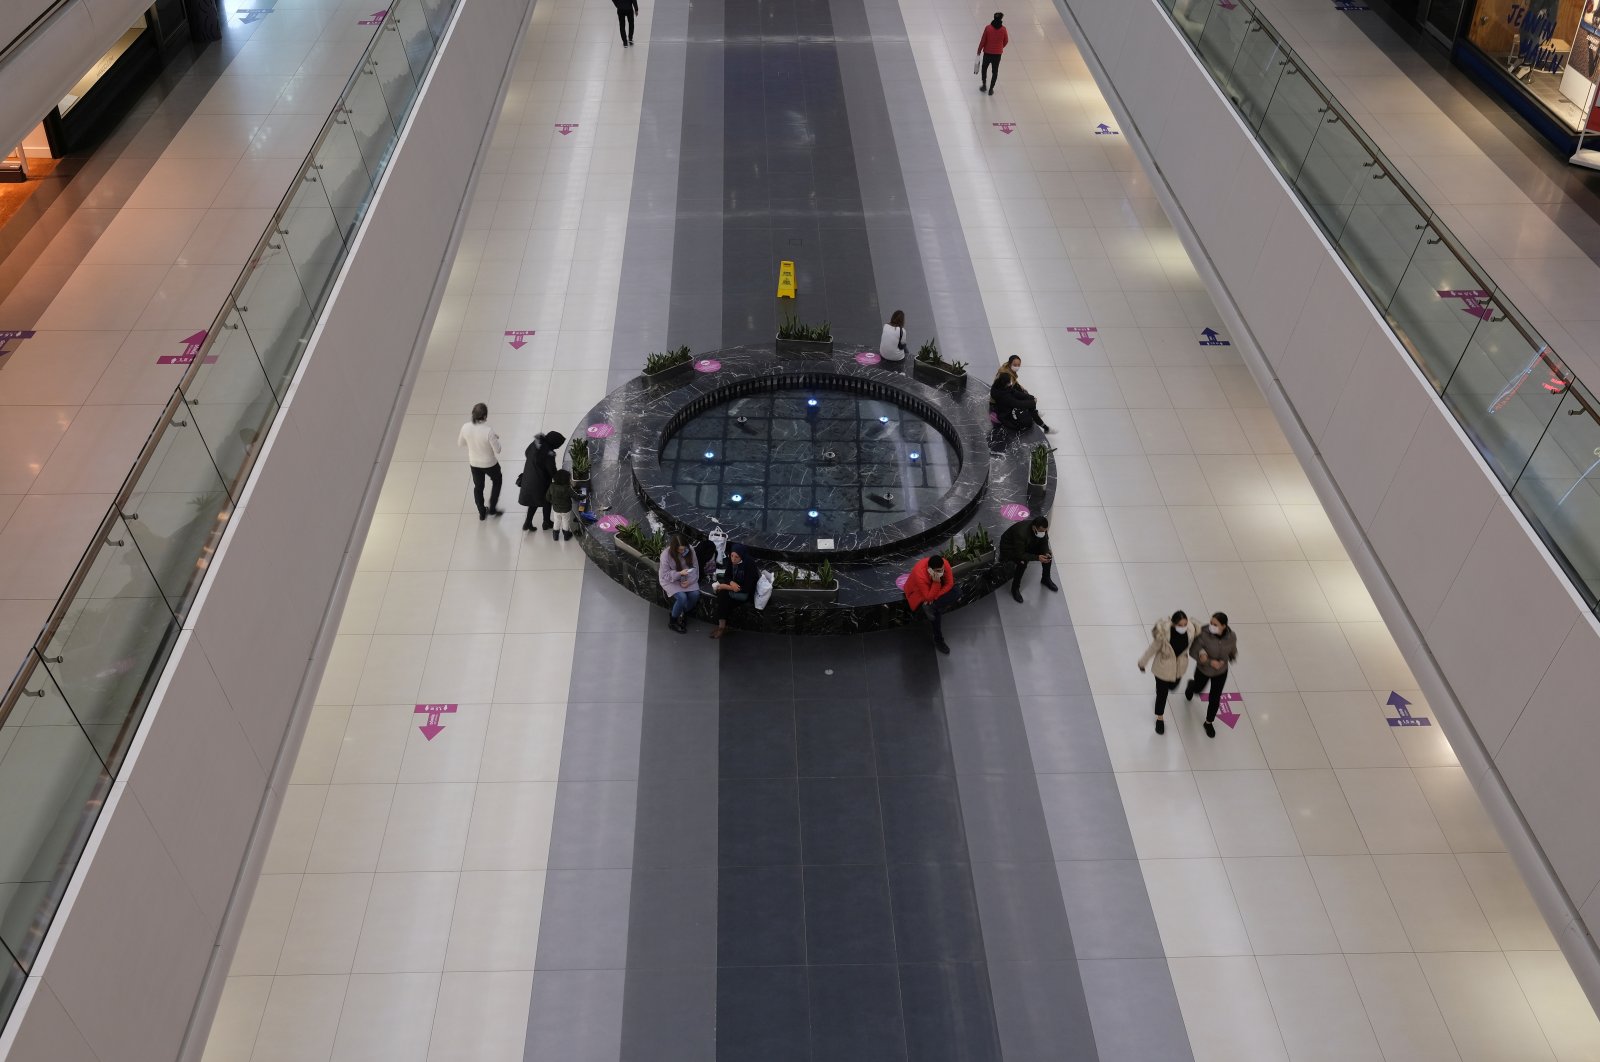 People are seen on the floor at a shopping mall in Istanbul, Turkey, Dec. 2, 2020. (Reuters Photo)